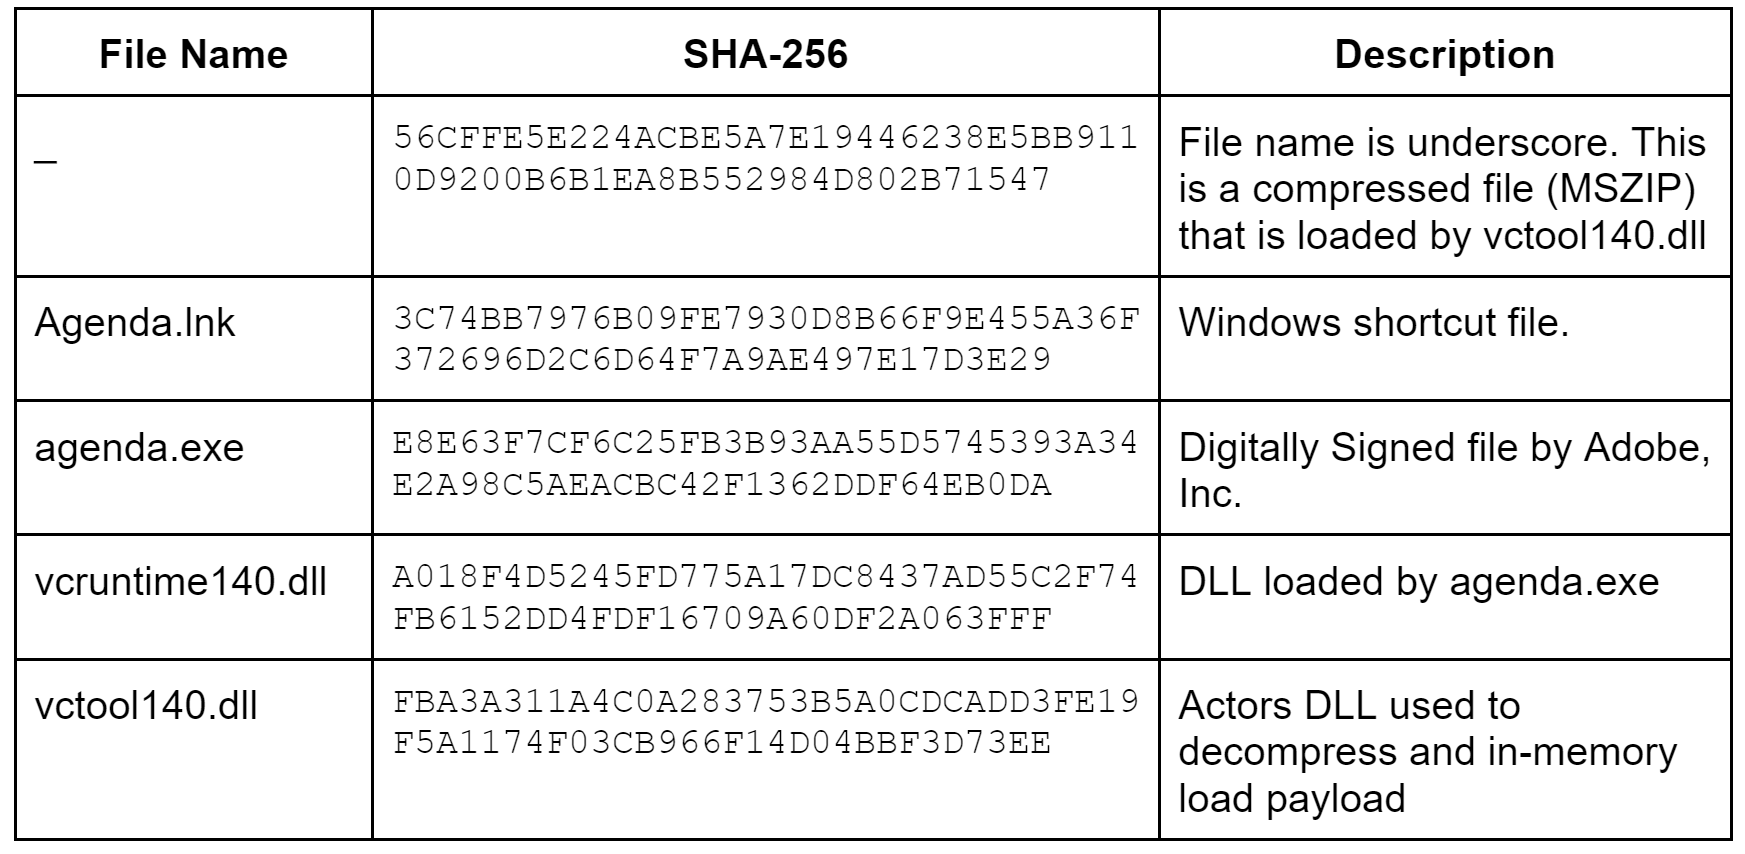 Agenda.iso embedded file properties - Campaign 1. File names, SHA-256 hashes and descriptions are shown. Files include: the underscore file, a compressed file that is loaded by vctool140.dll, Agenda.lnk, a Windows shortcut file, agenda.exe, a file digitally signed by Adobe, vcruntime140.dll, a DLL loaded by agenda.exe, and vctool140.dll, the actor's DLL, used to decompress and in-memory load the payload.